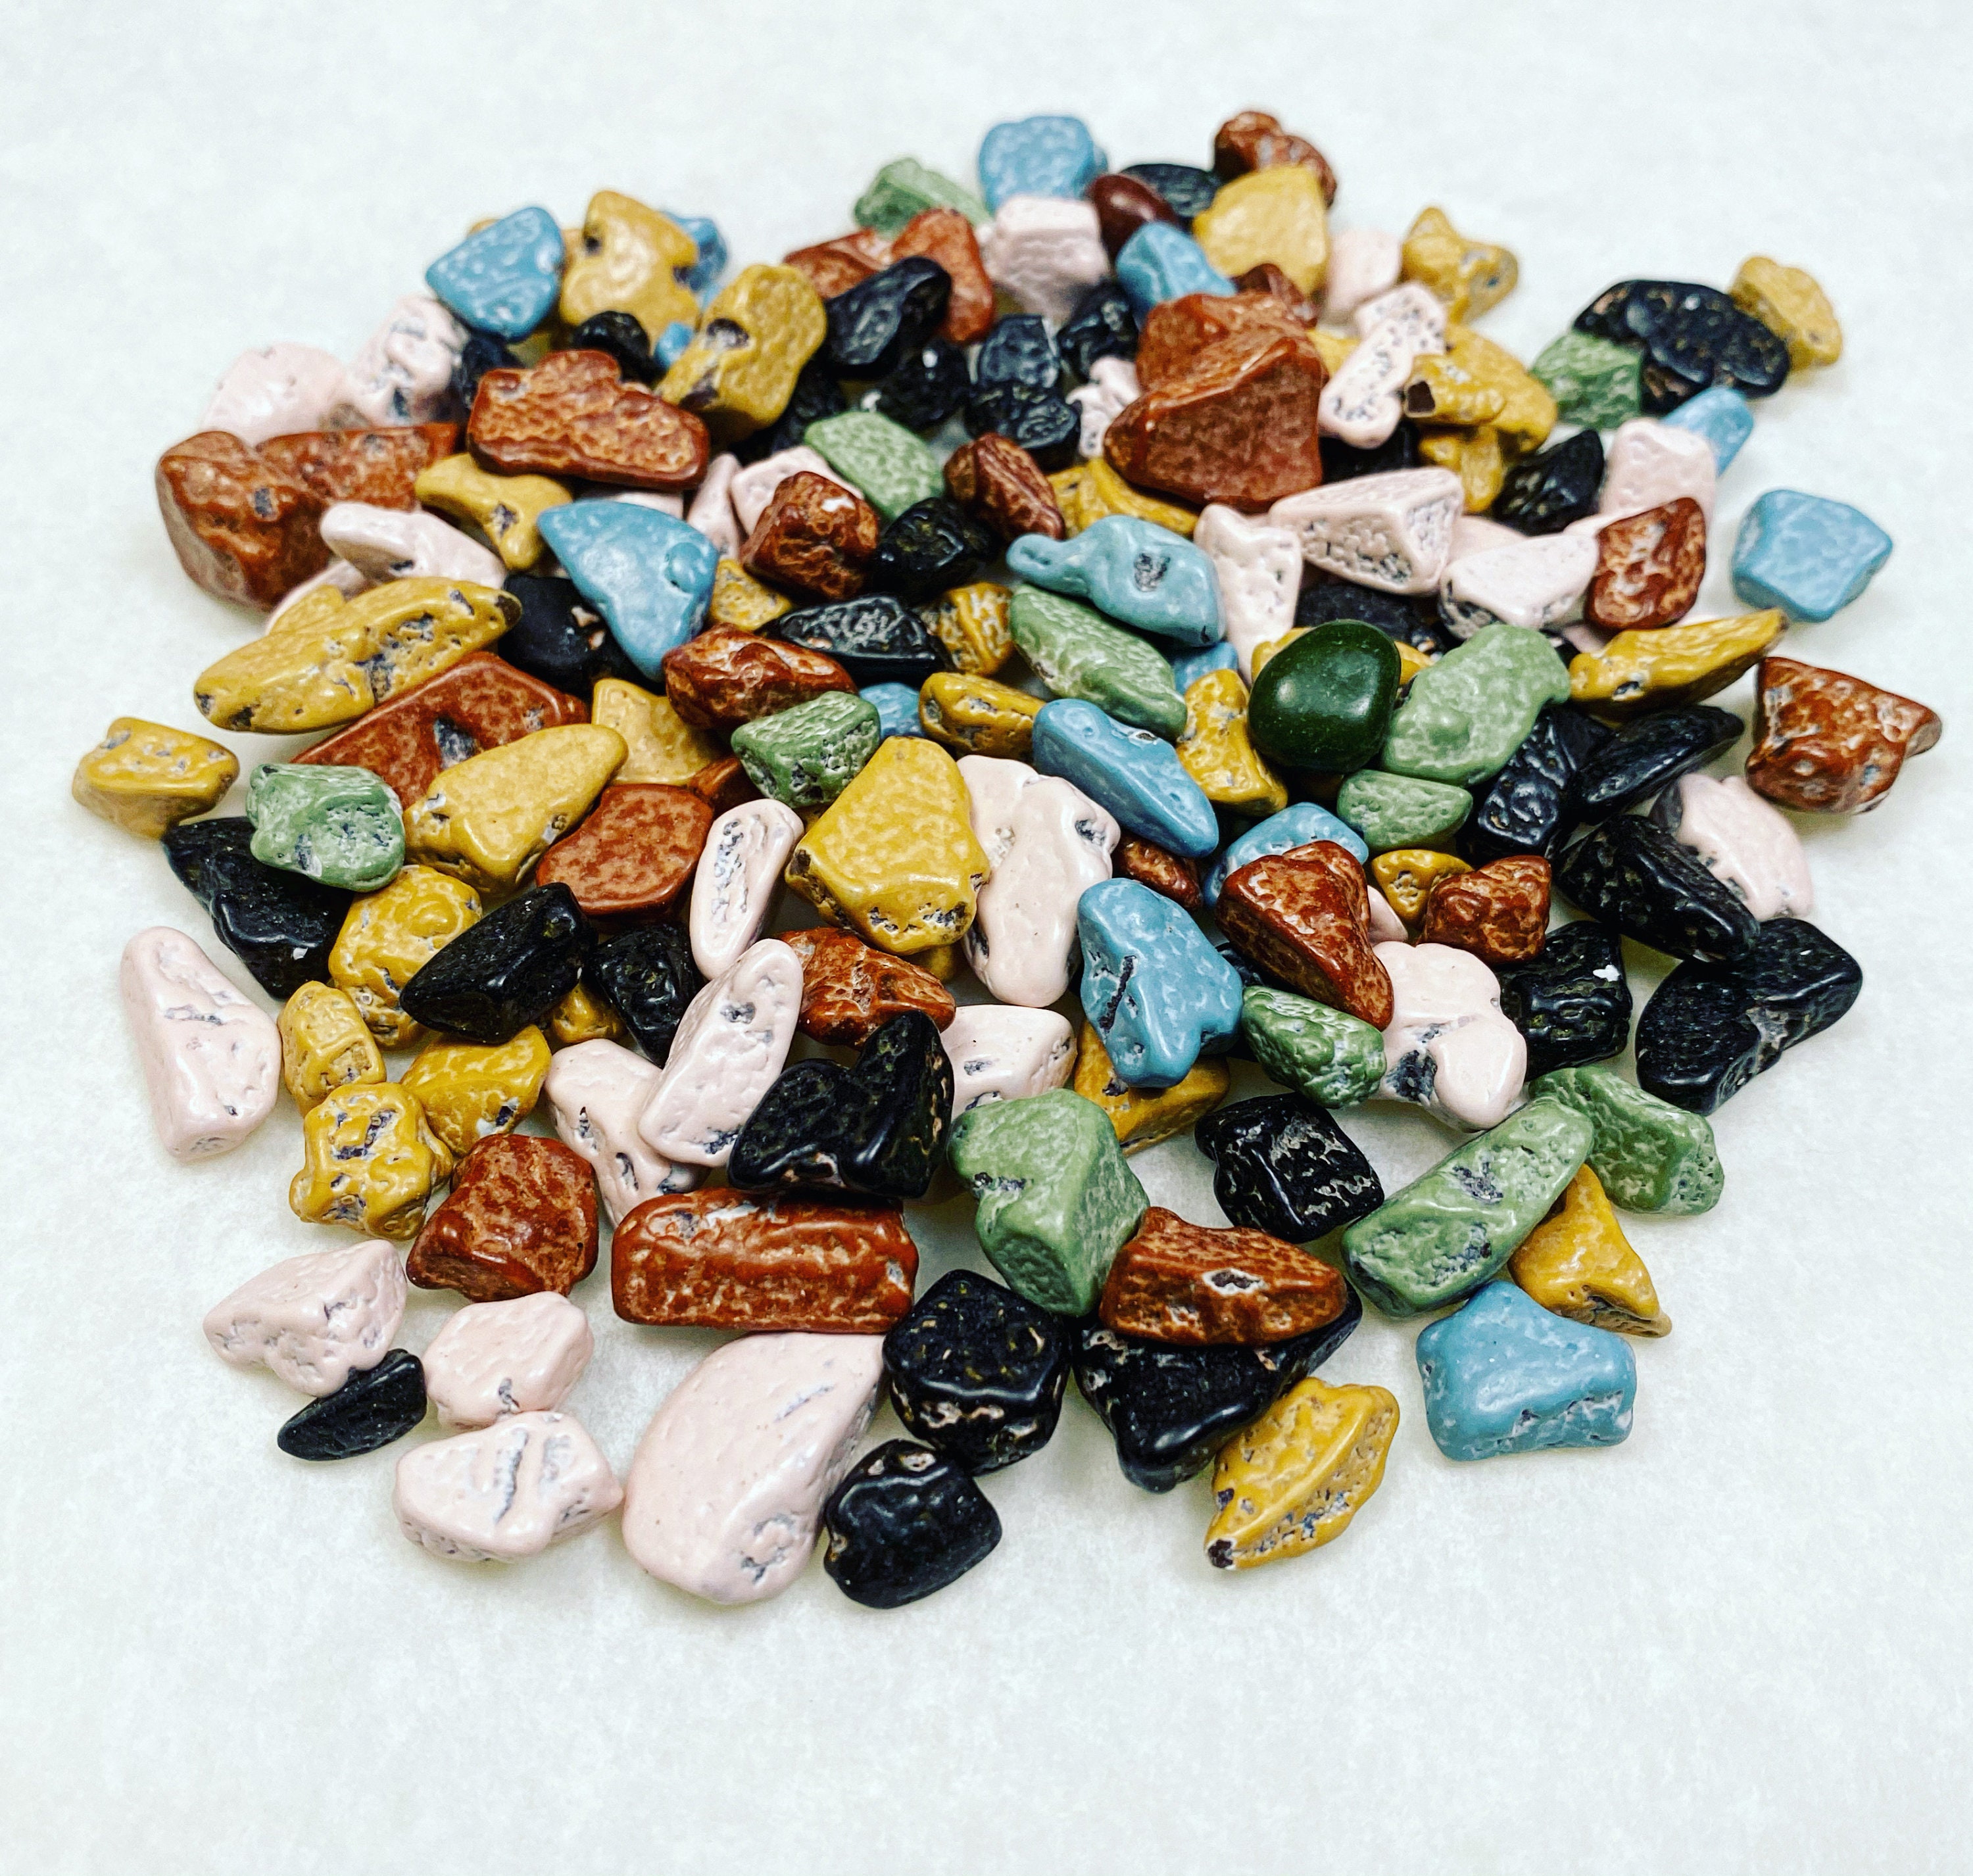 Candy Coated Milk Chocolate Rocks Edible River Rocks Rocking Climbing Candy  Hope Your Birthday Rocked Gift Crystal Candies 